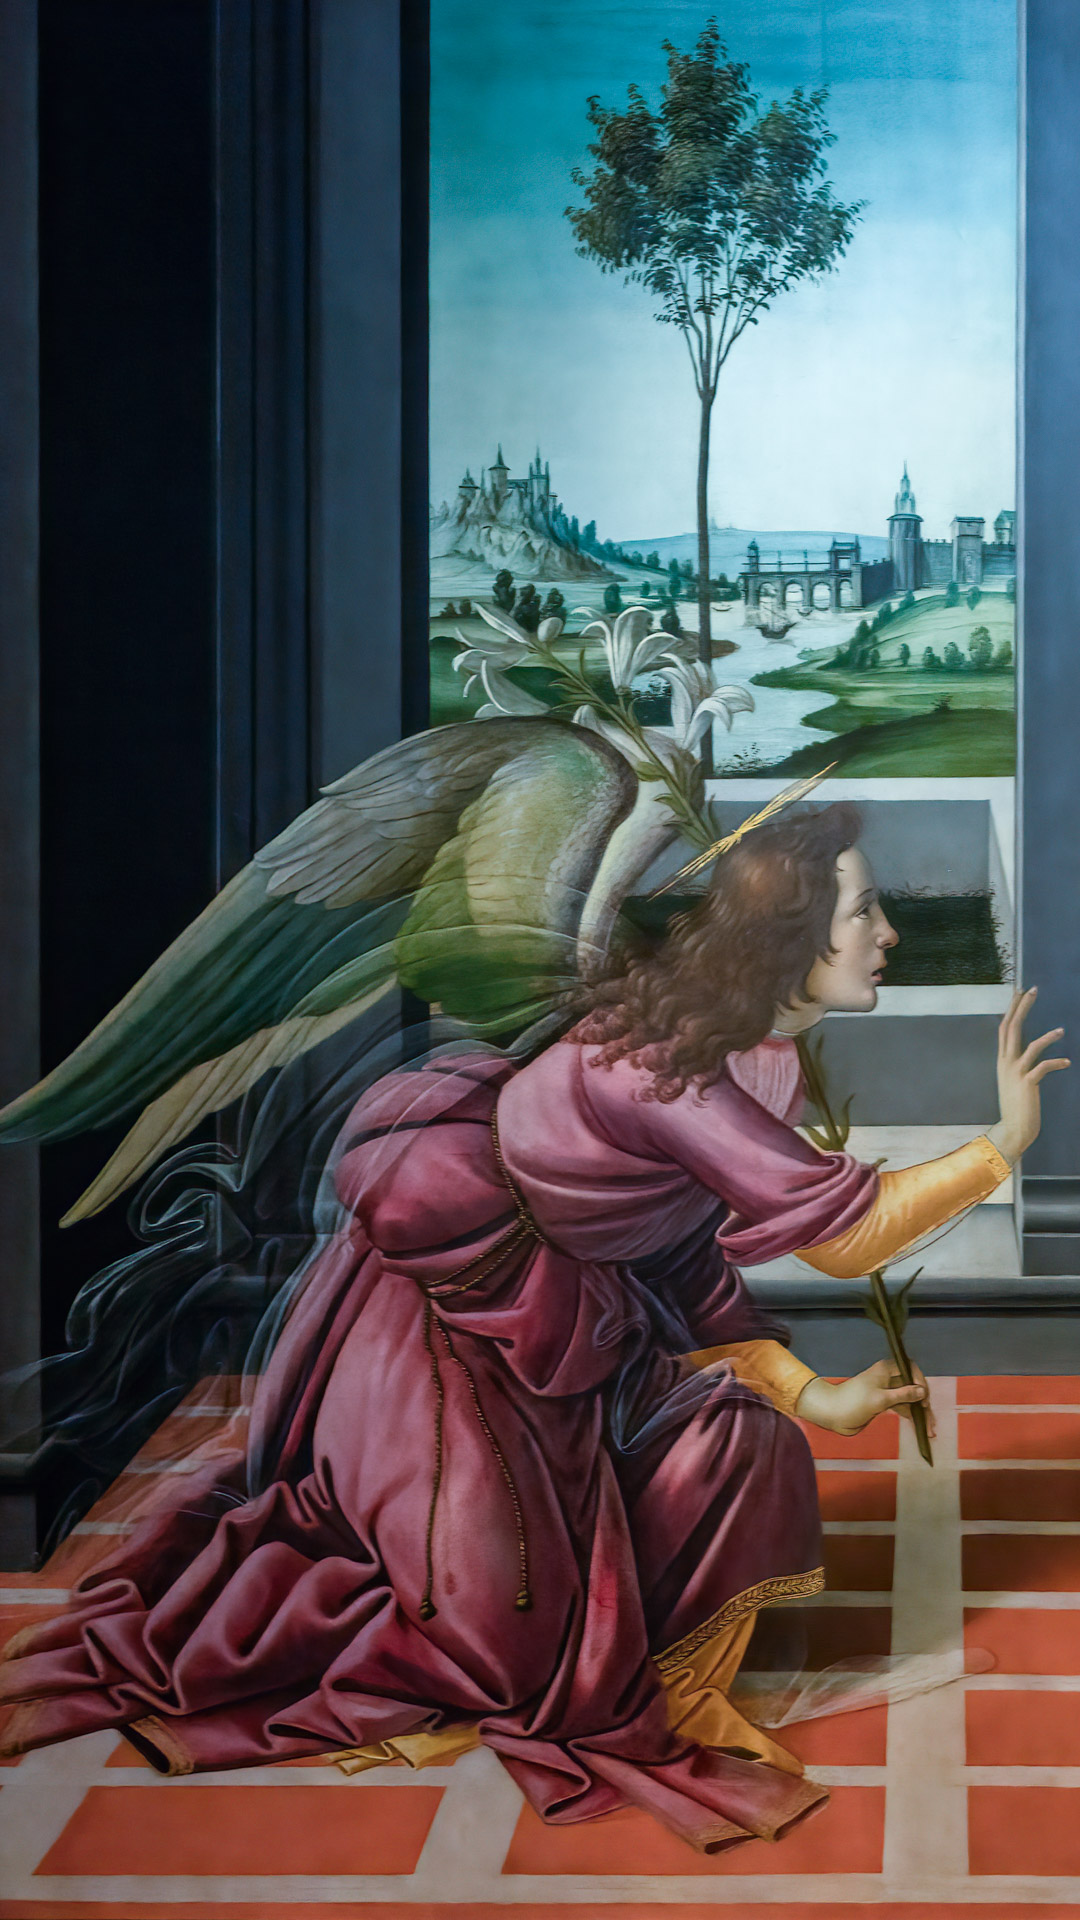 Immerse your iPhone in the beauty of Botticelli's works through our easy-to-download HD wallpapers.